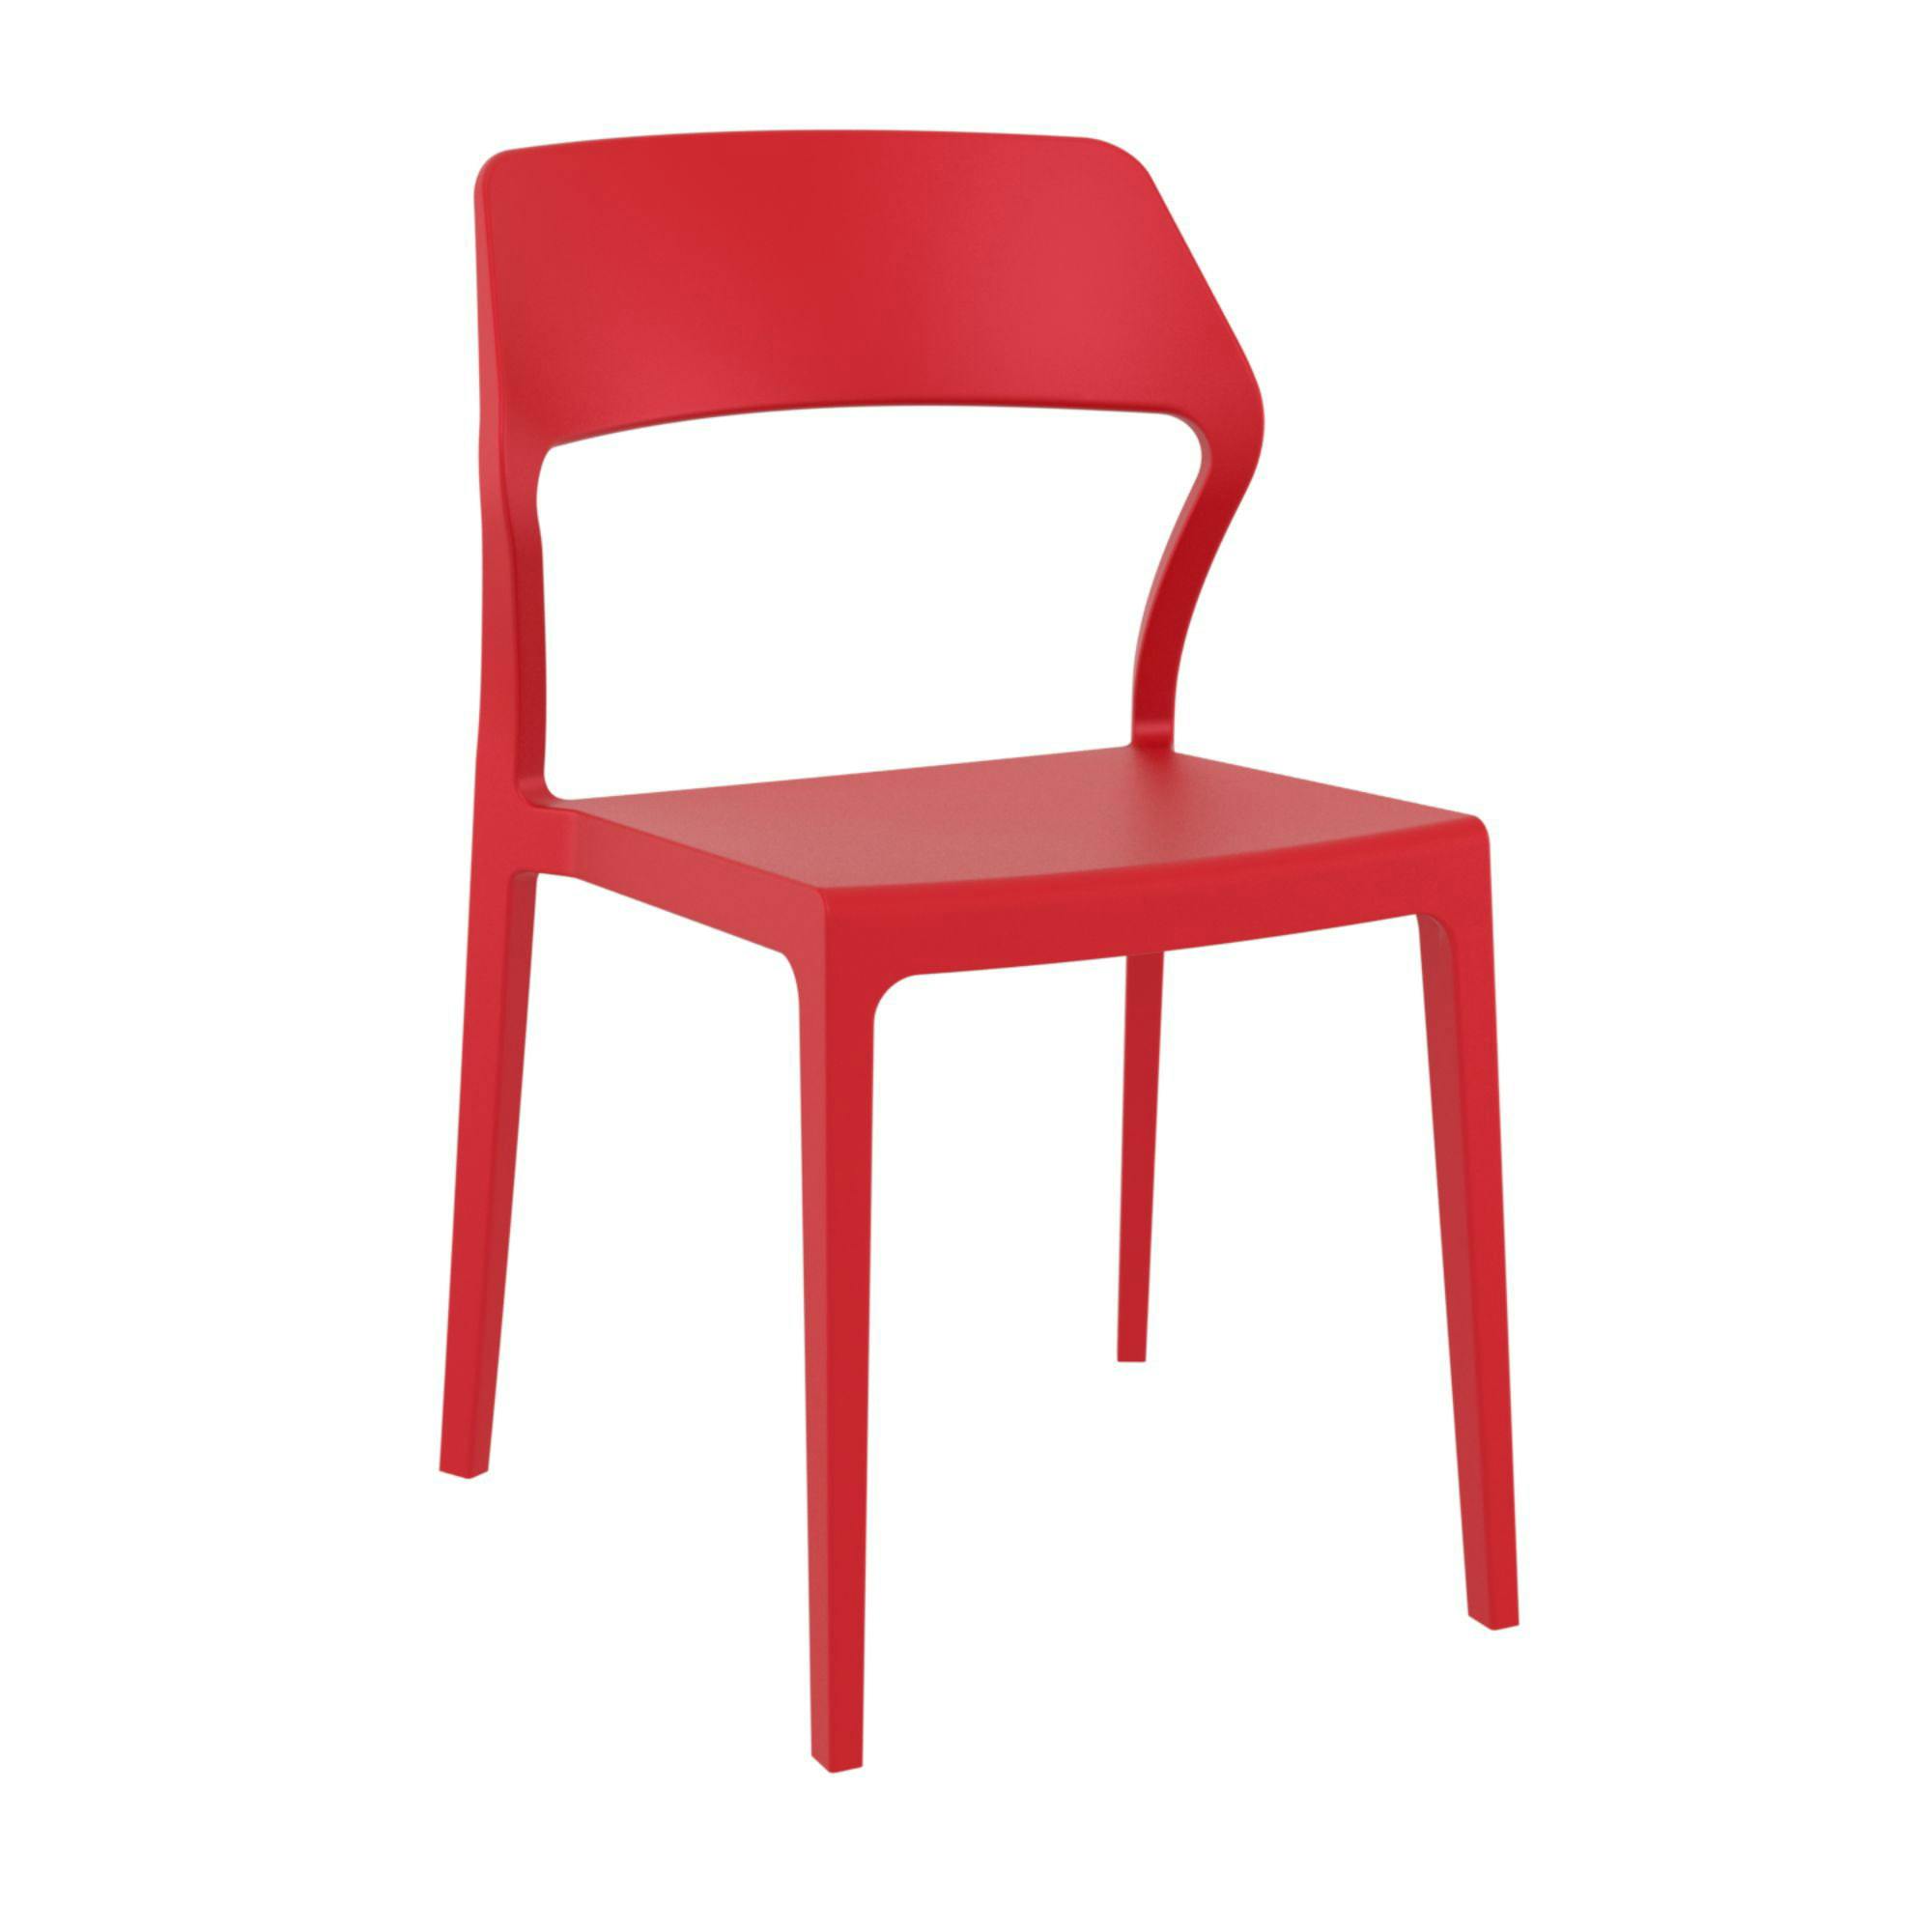 32.75" Radiant Red Resin Indoor/Outdoor Patio Dining Chair